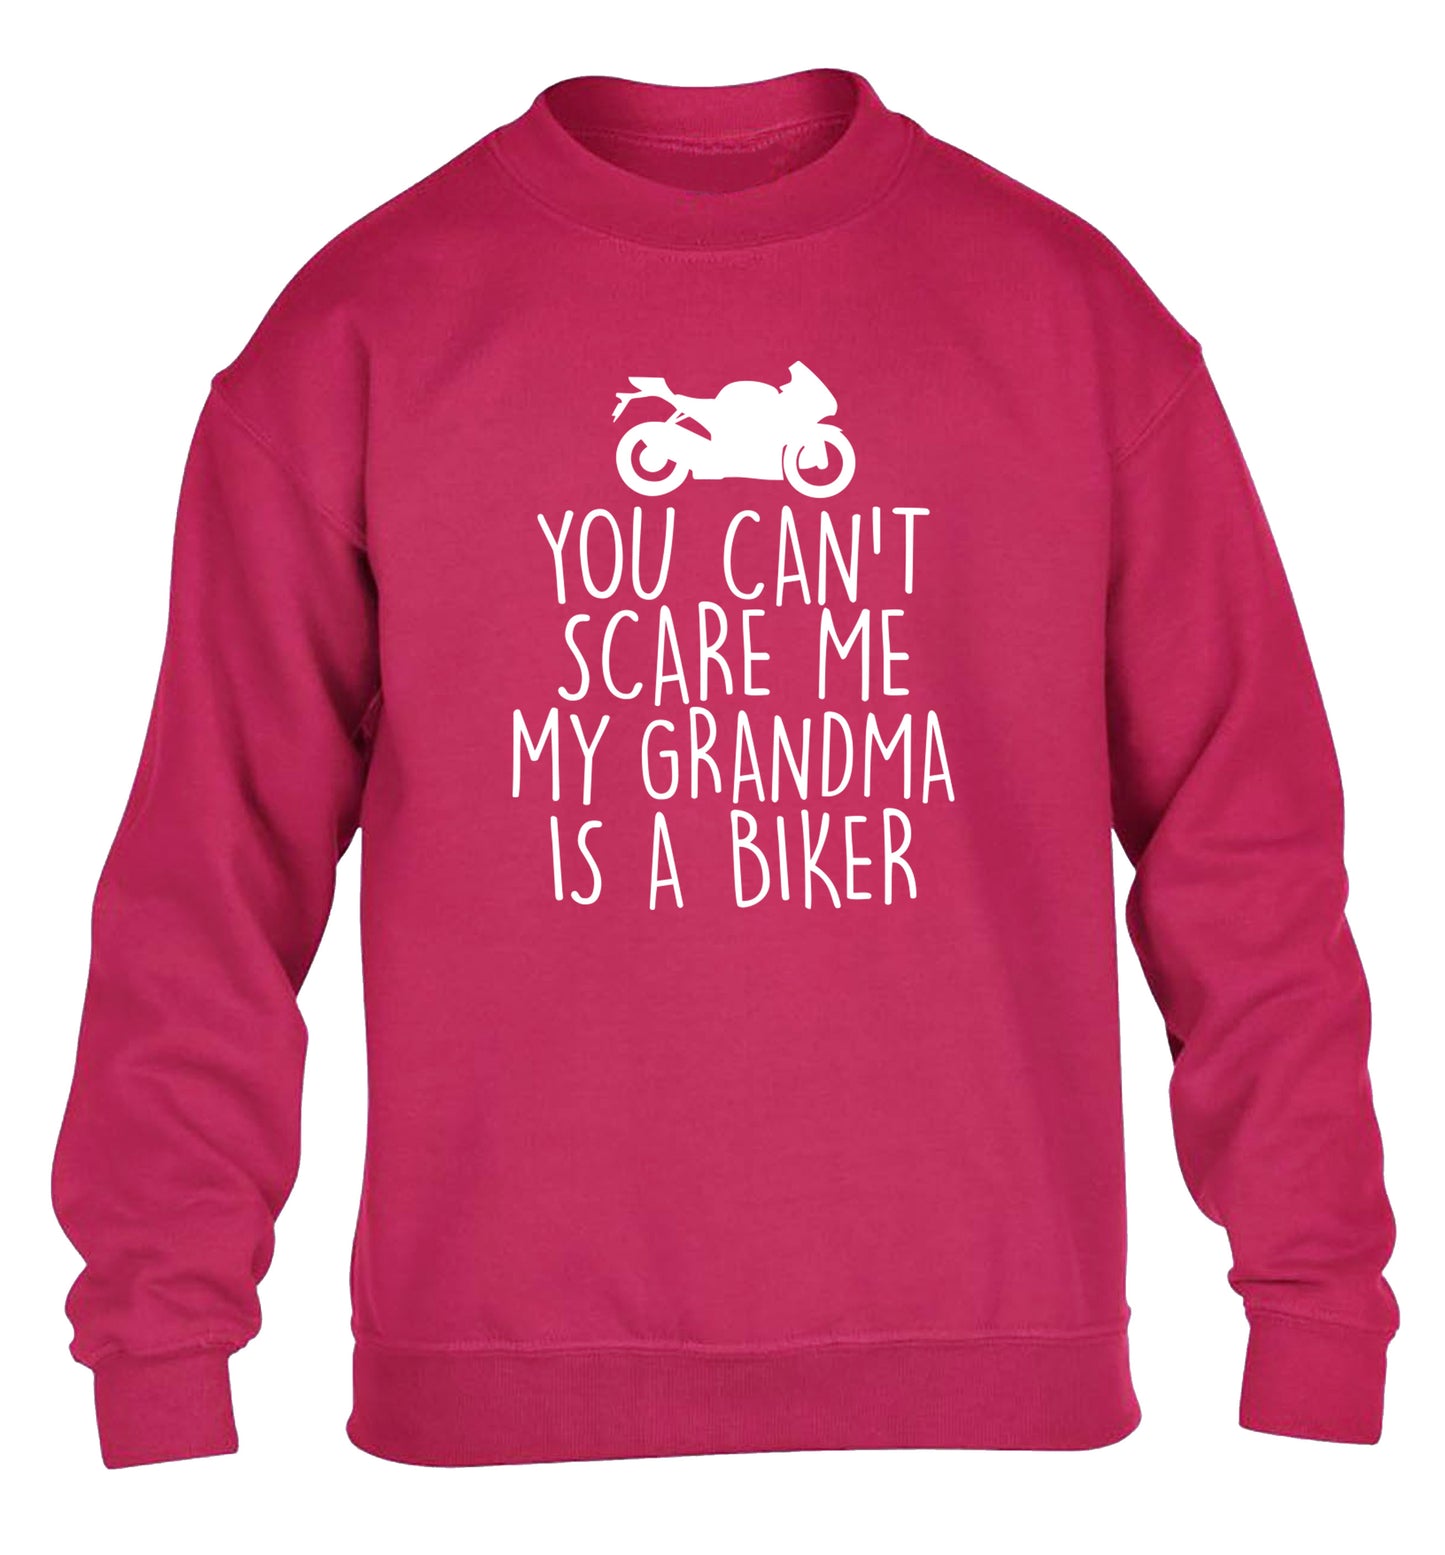 You can't scare me my grandma is a biker children's pink sweater 12-13 Years